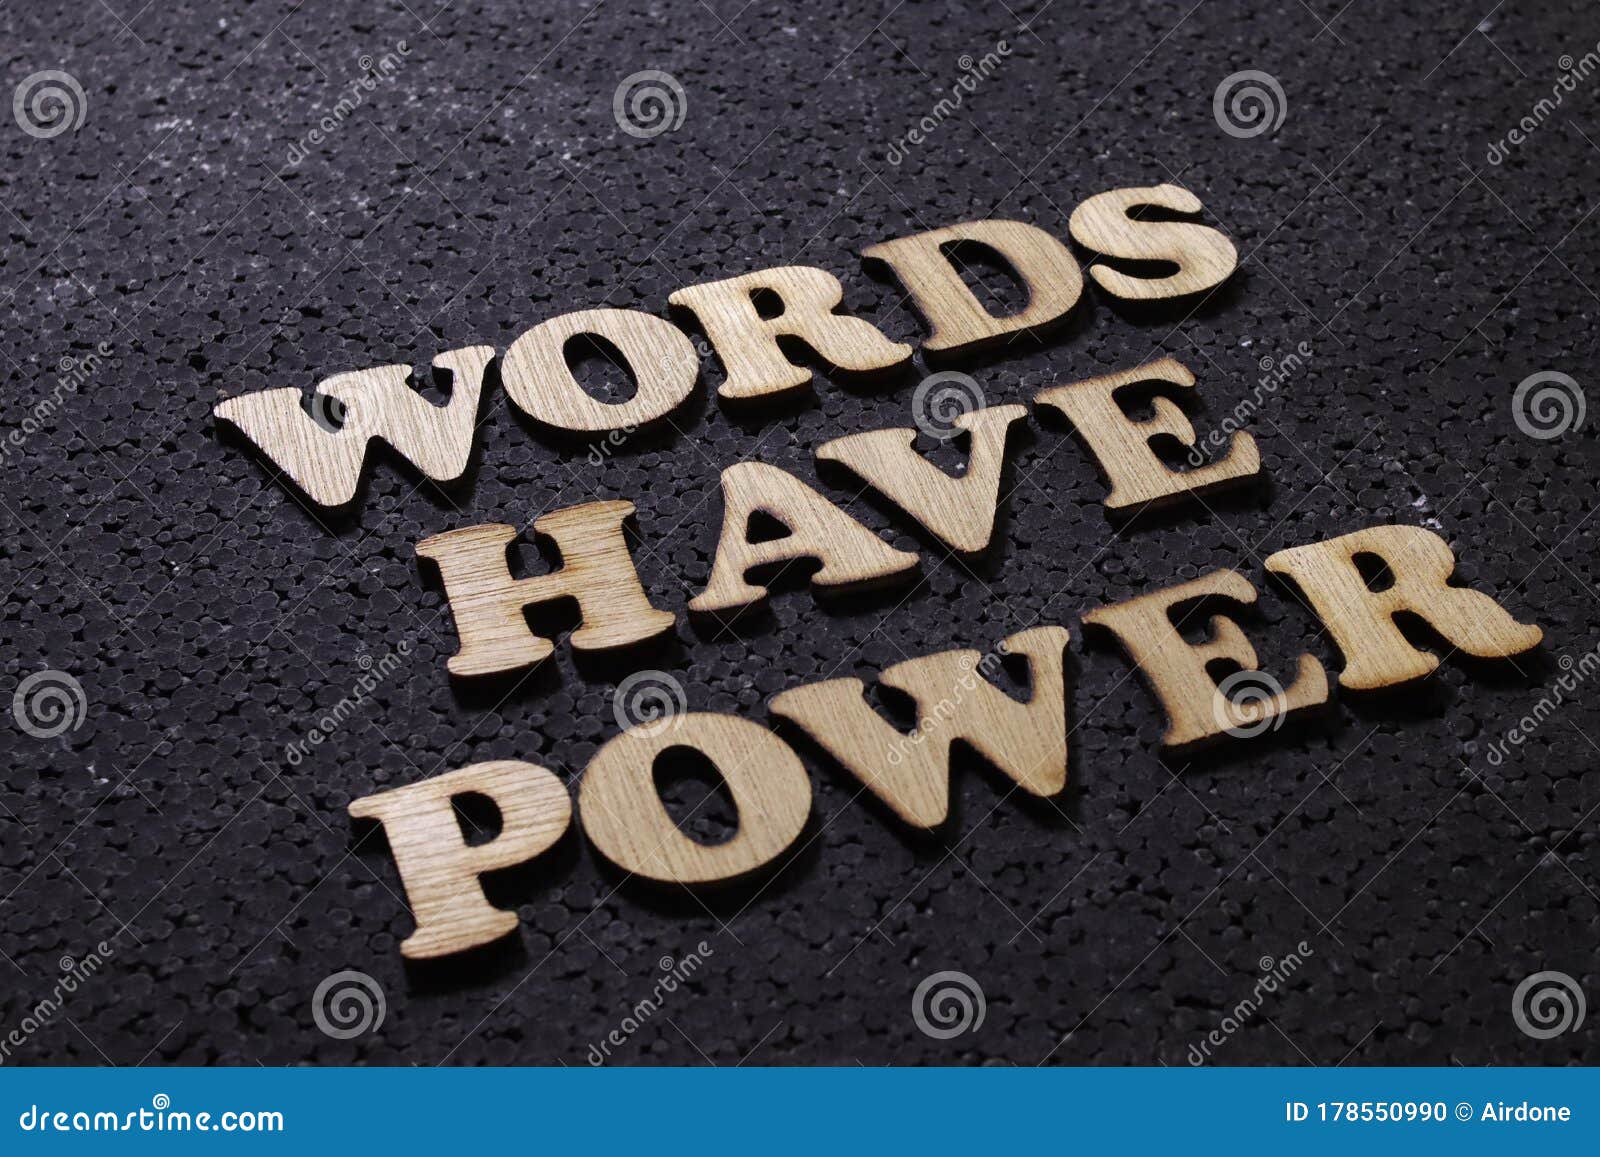 Words Have Power, Business Motivational Inspirational Quotes; Wooden